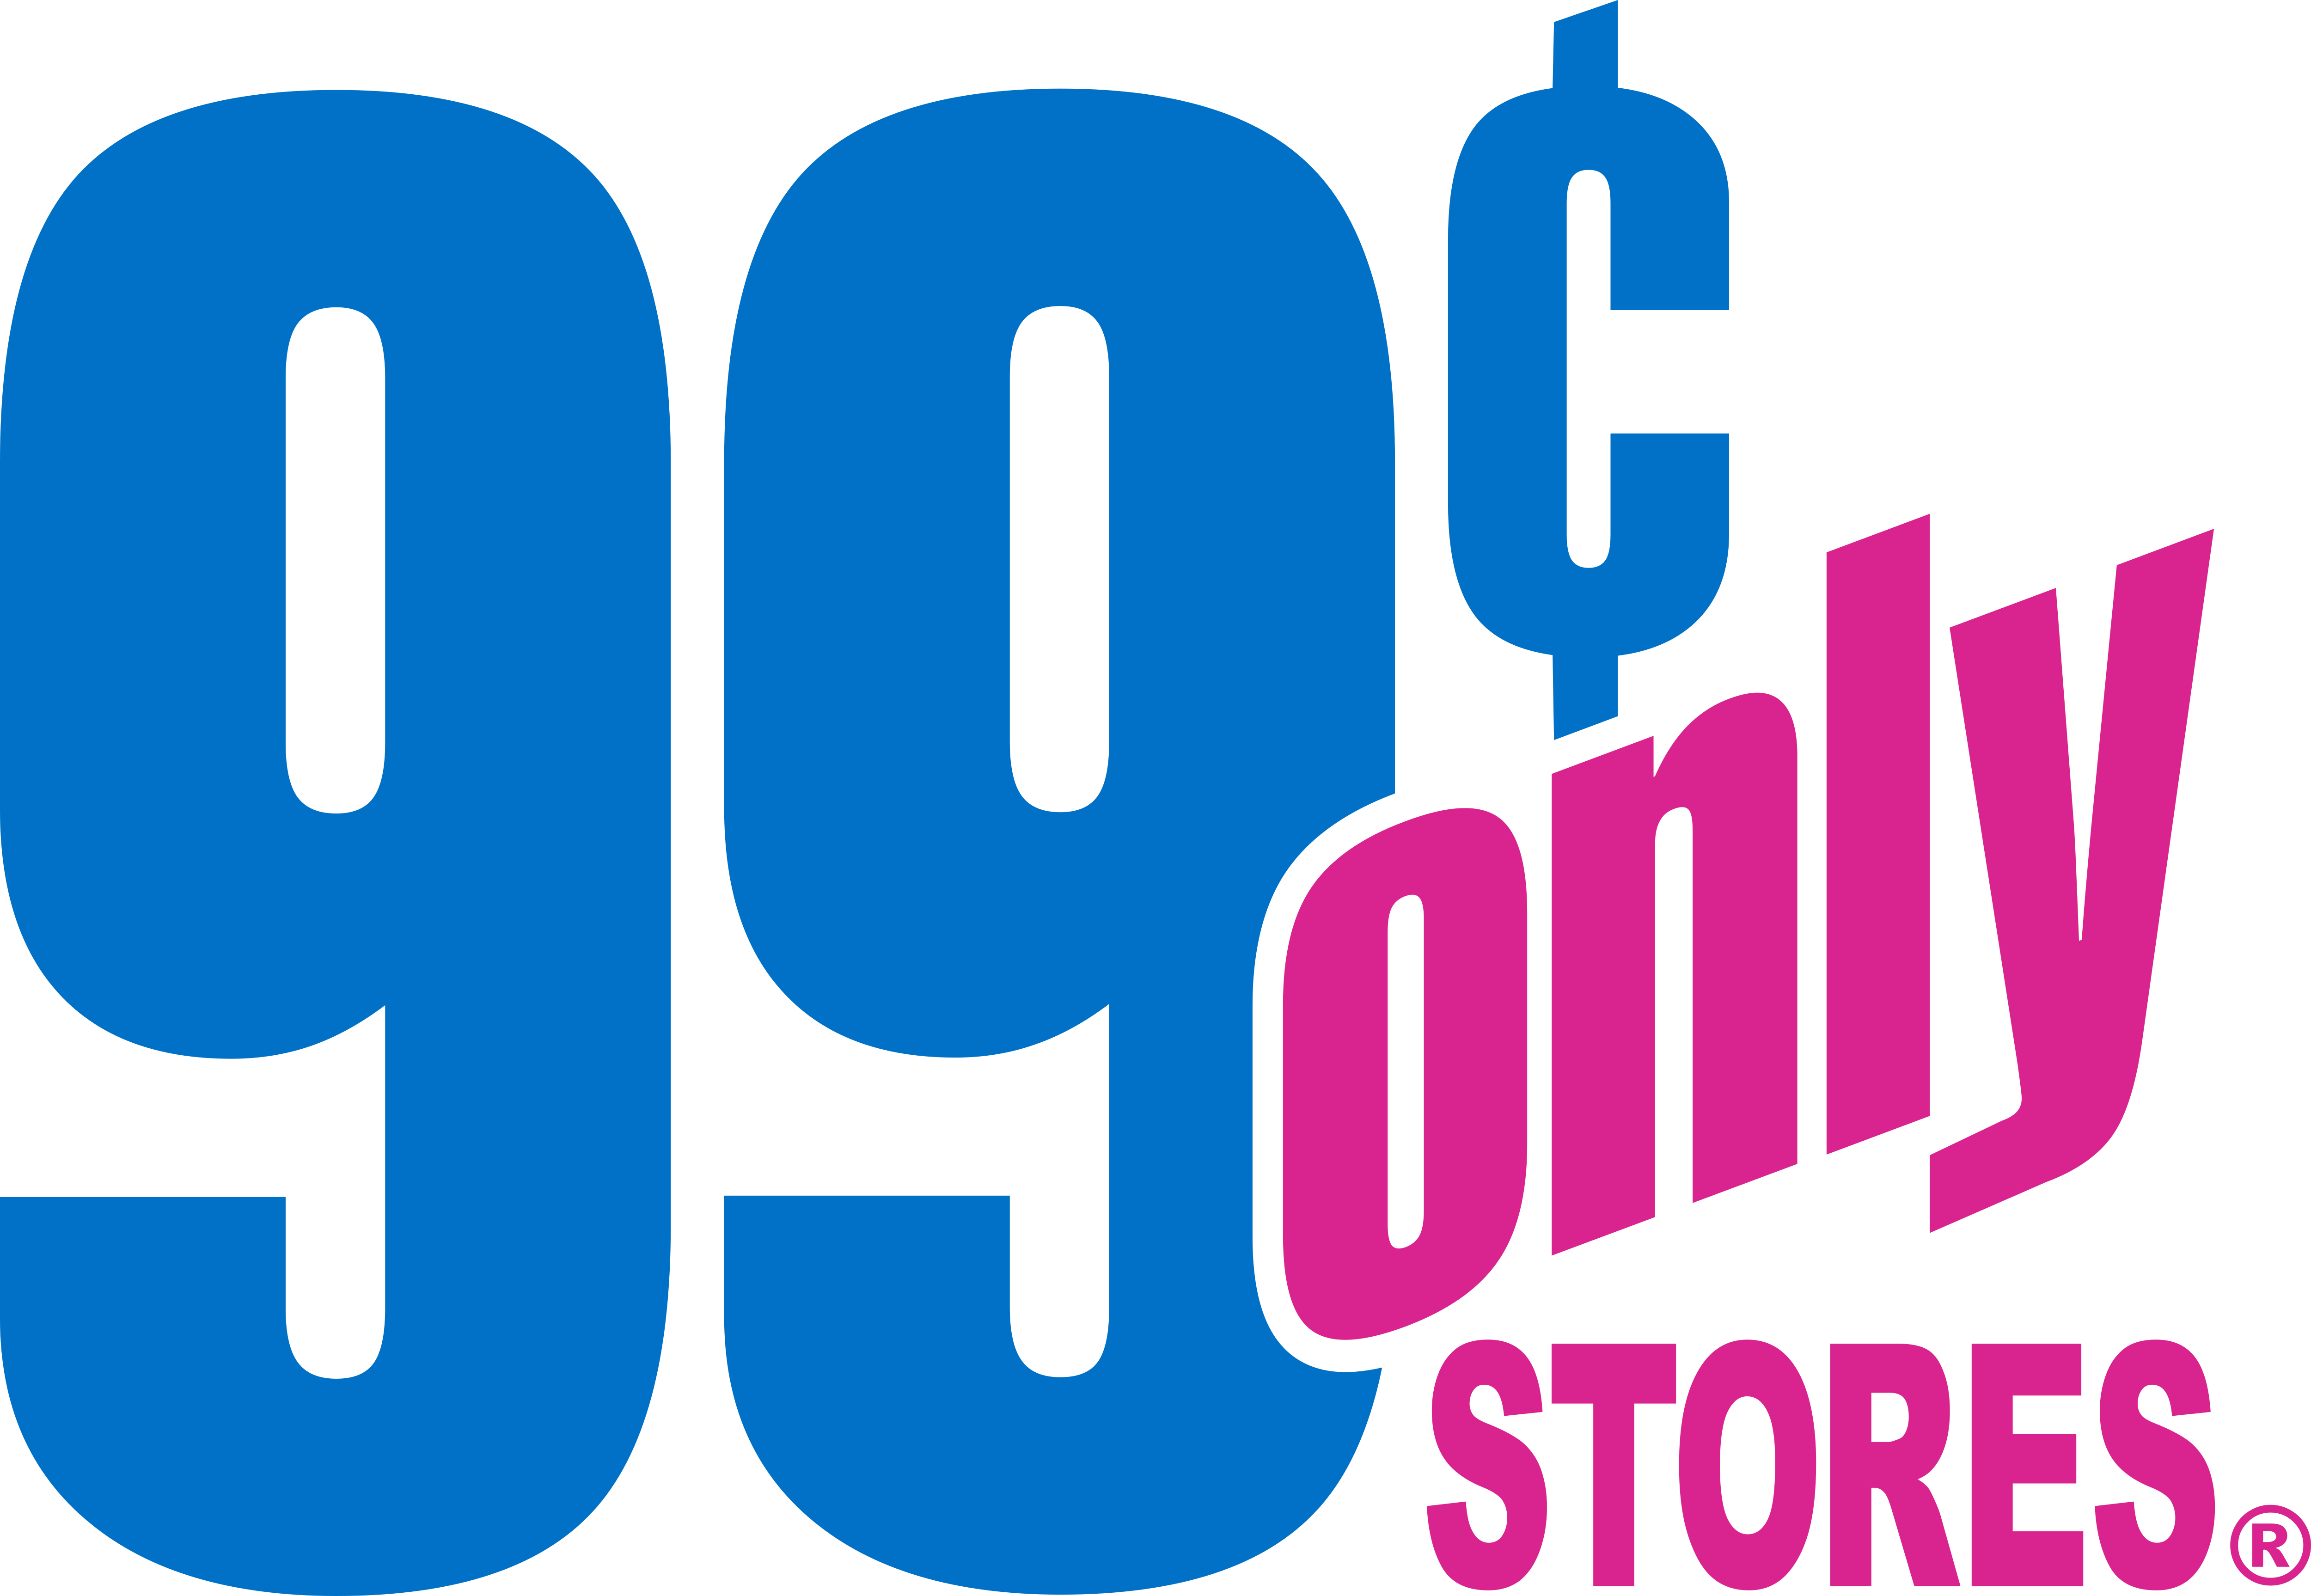 99 Cents Only Stores Logos Download